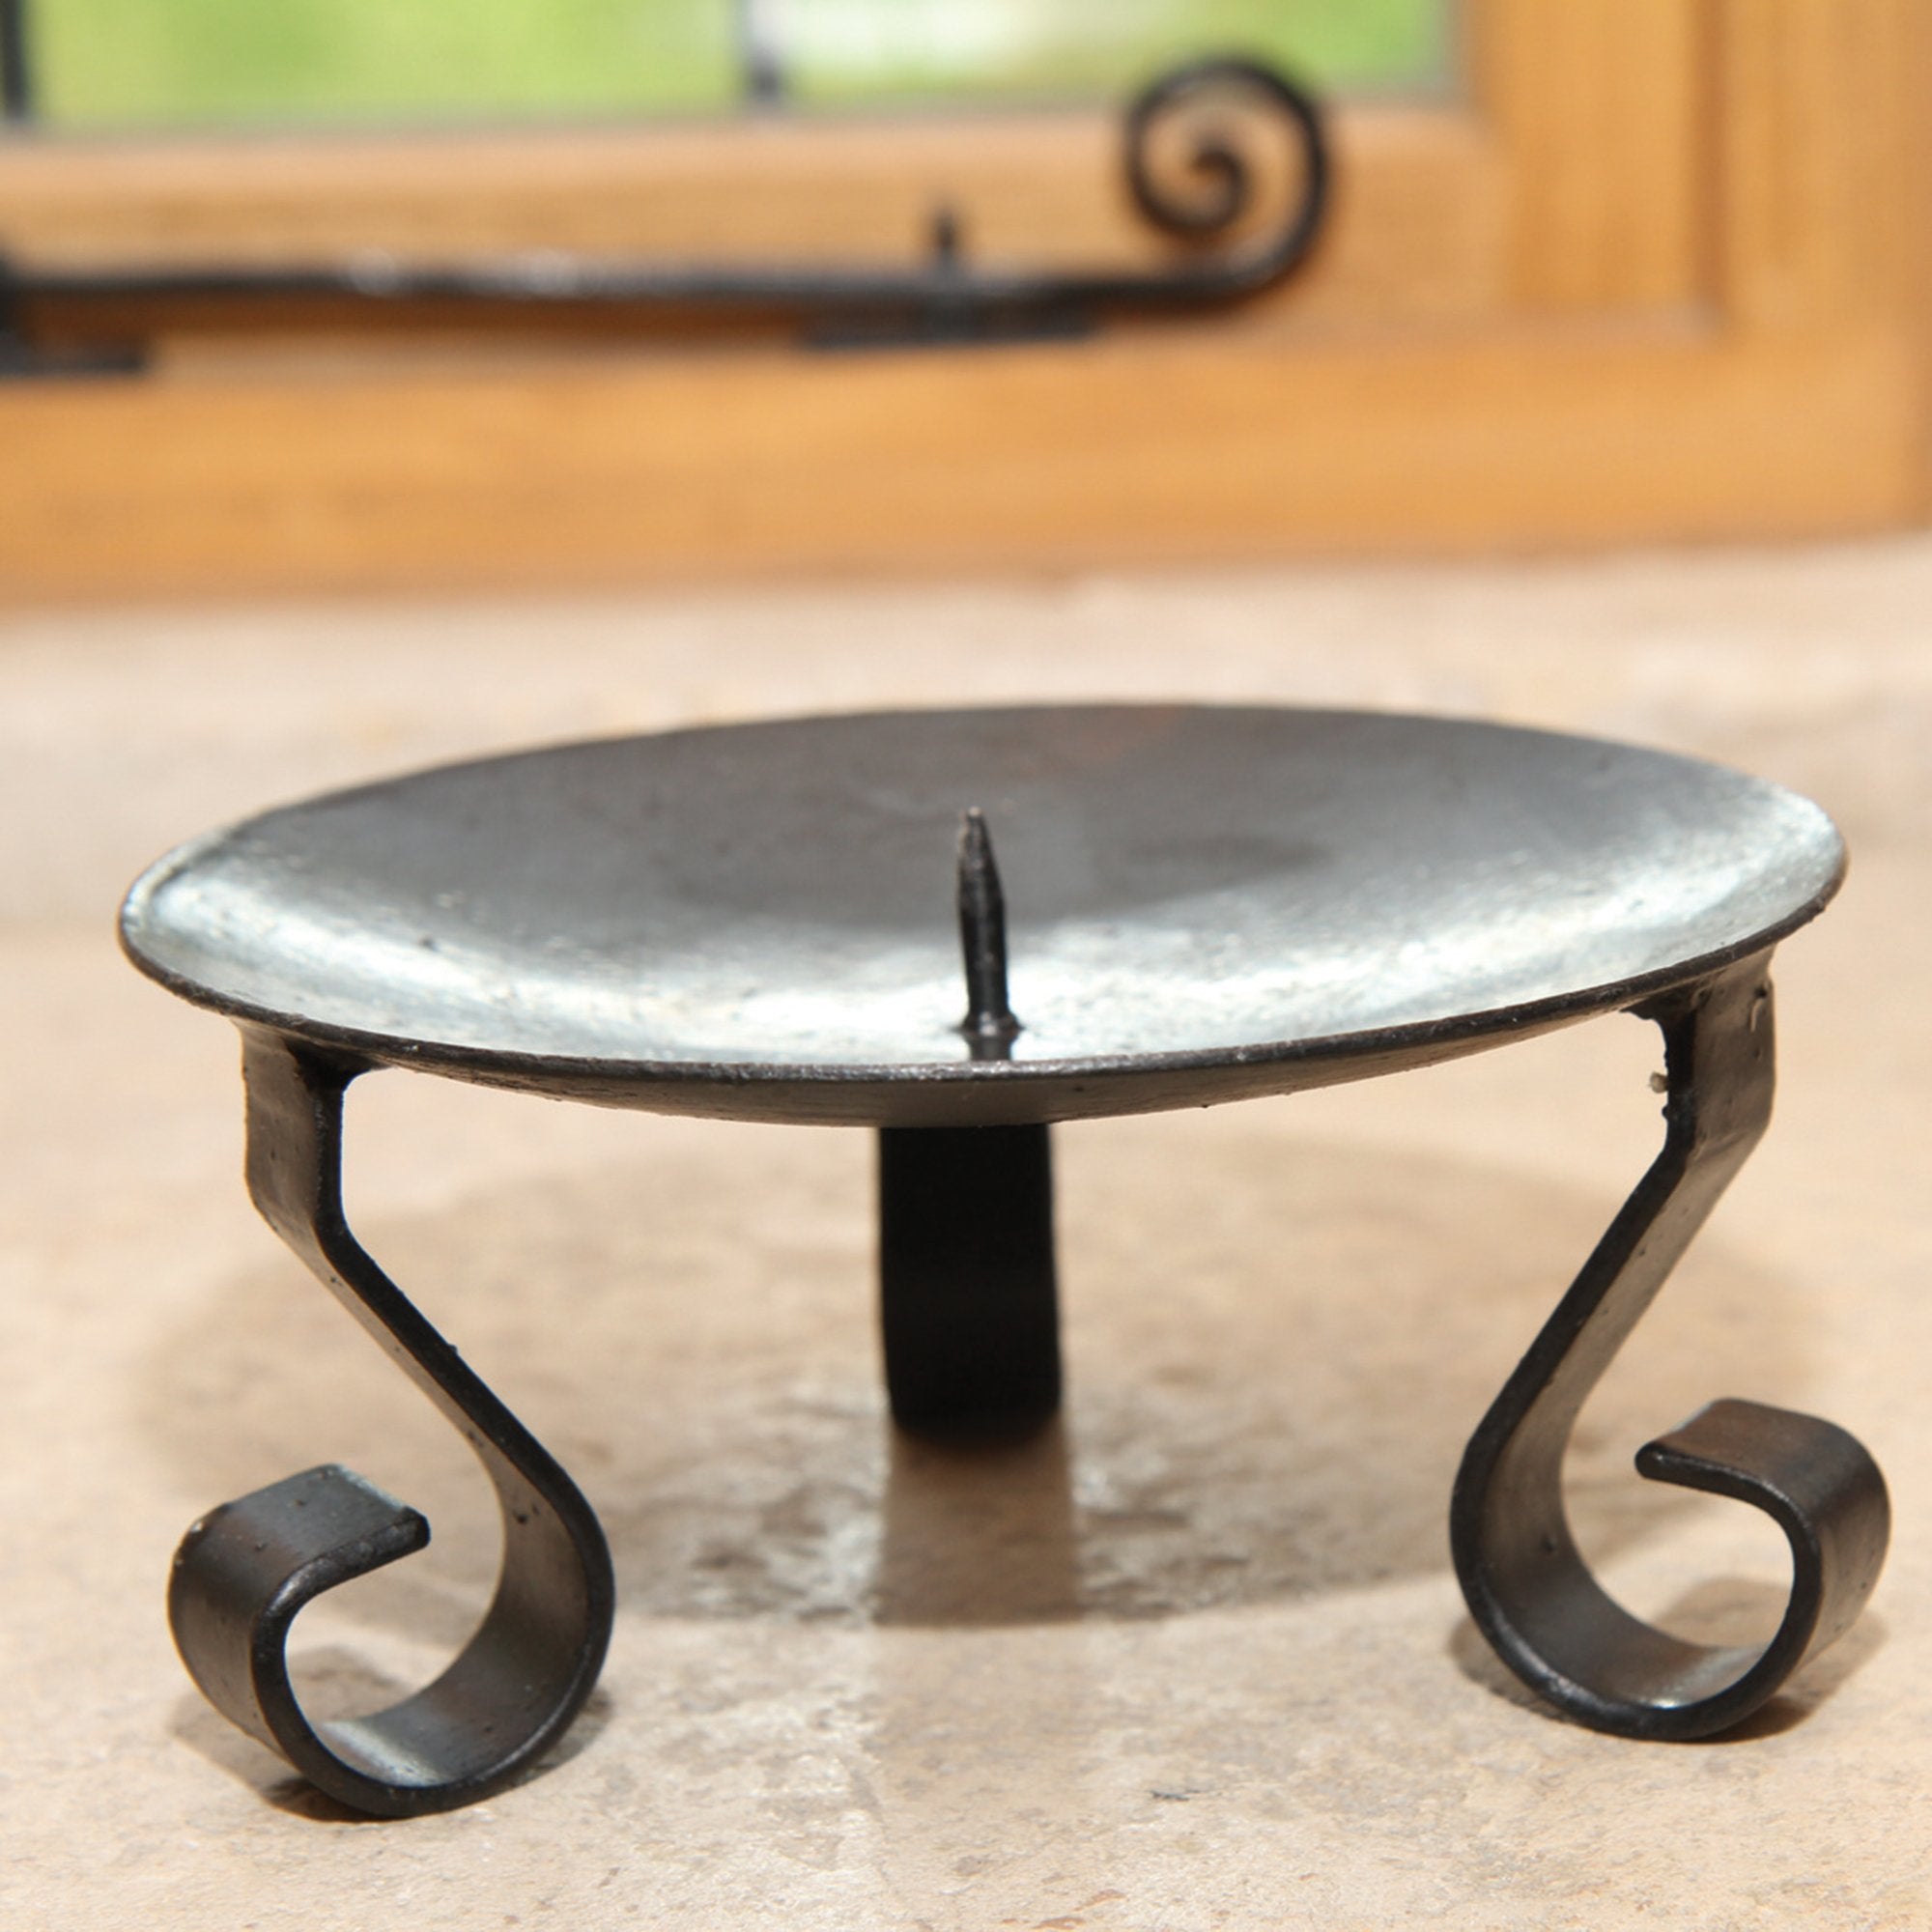 Small (4inch/100mm) Brecon Candle Holder